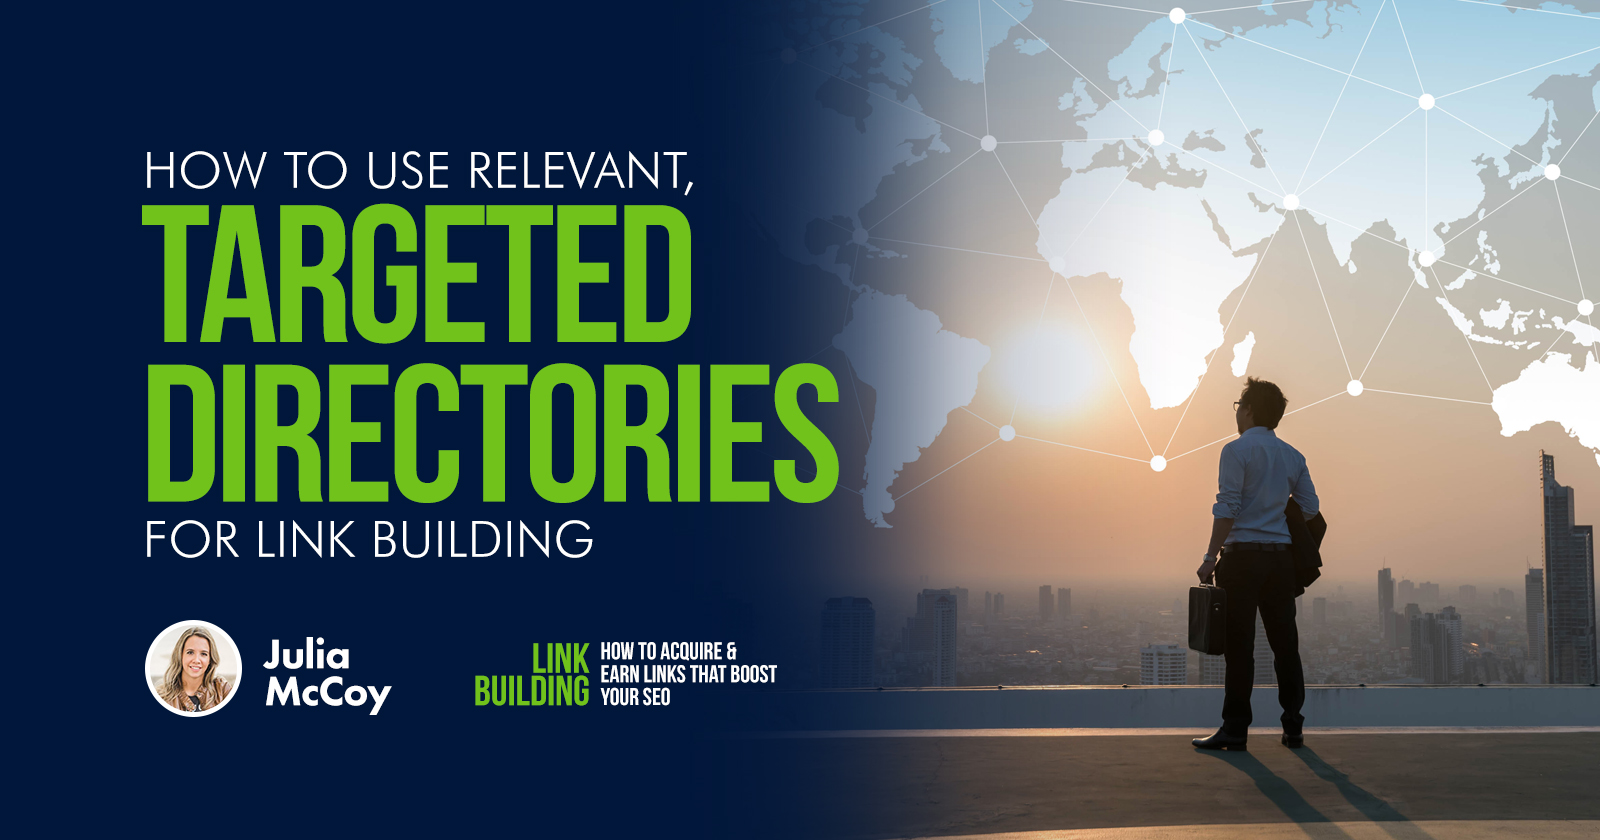 LB Guide - How to Use Relevant, Targeted Directories for Link Building - Julia McCoy